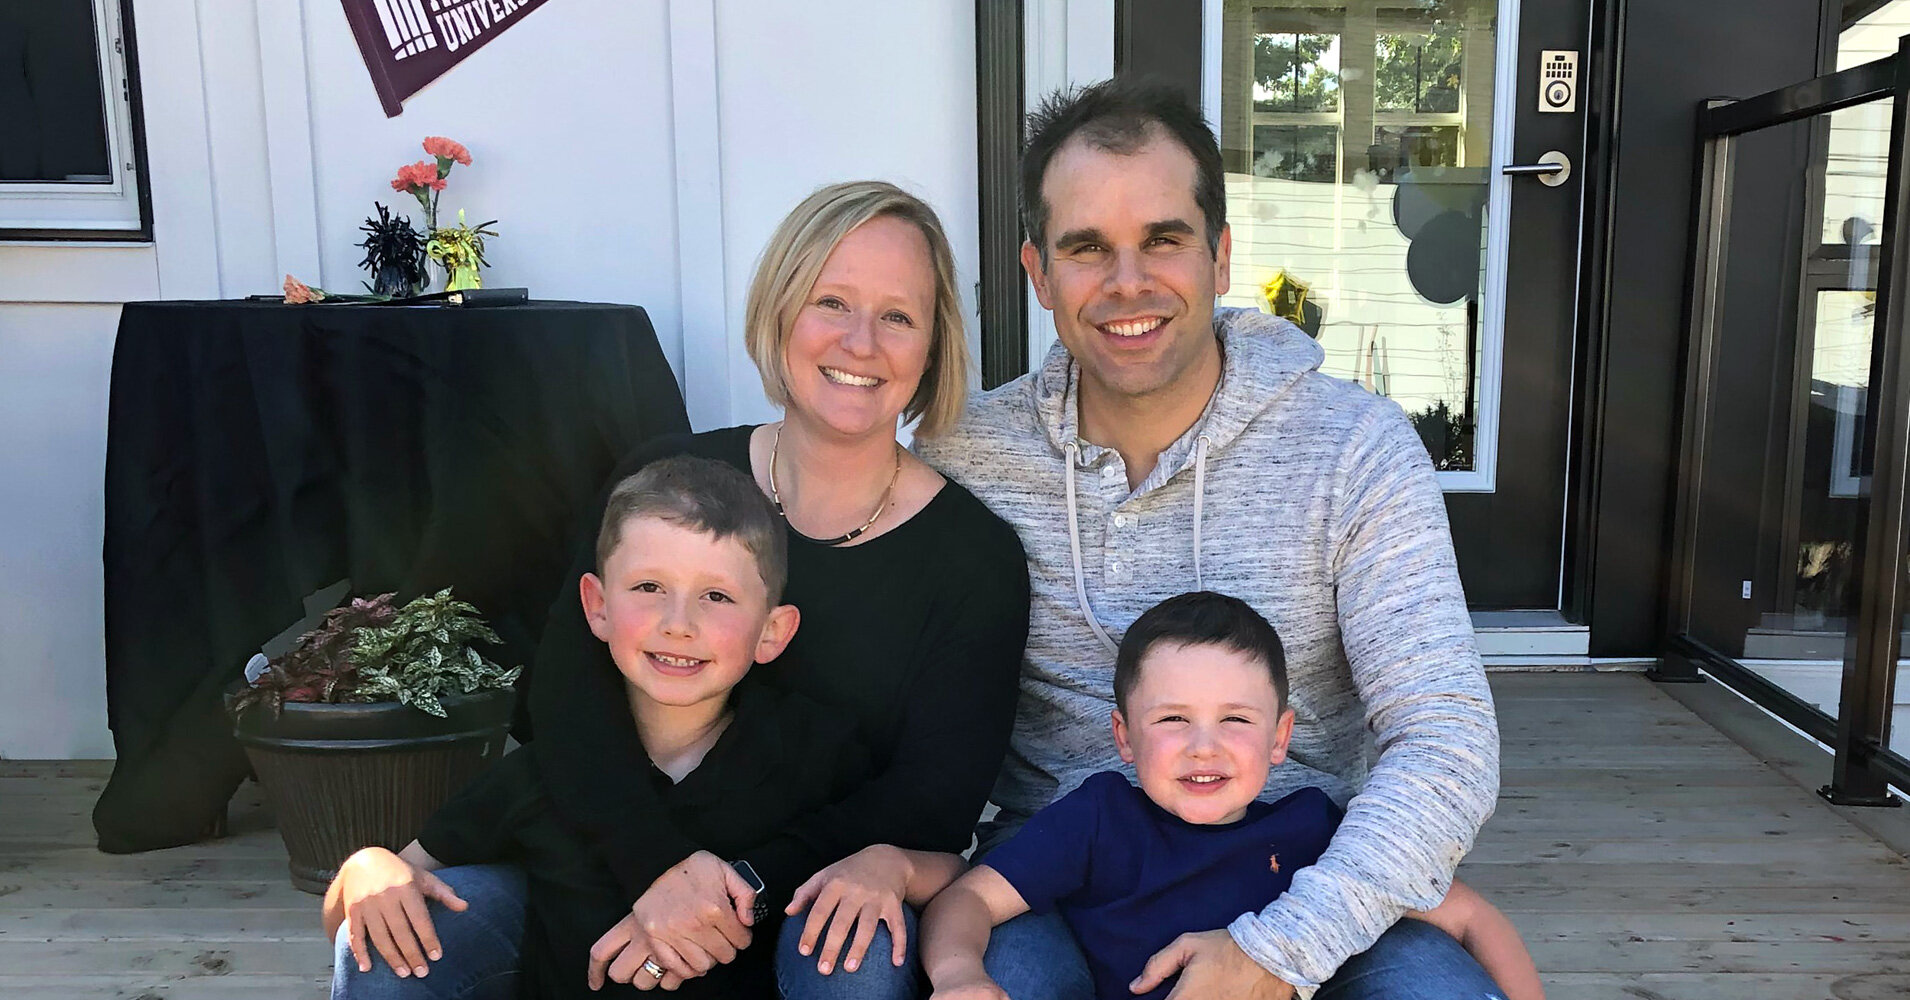 Mark at home with wife Meghan, and sons Carter and Sawyer.